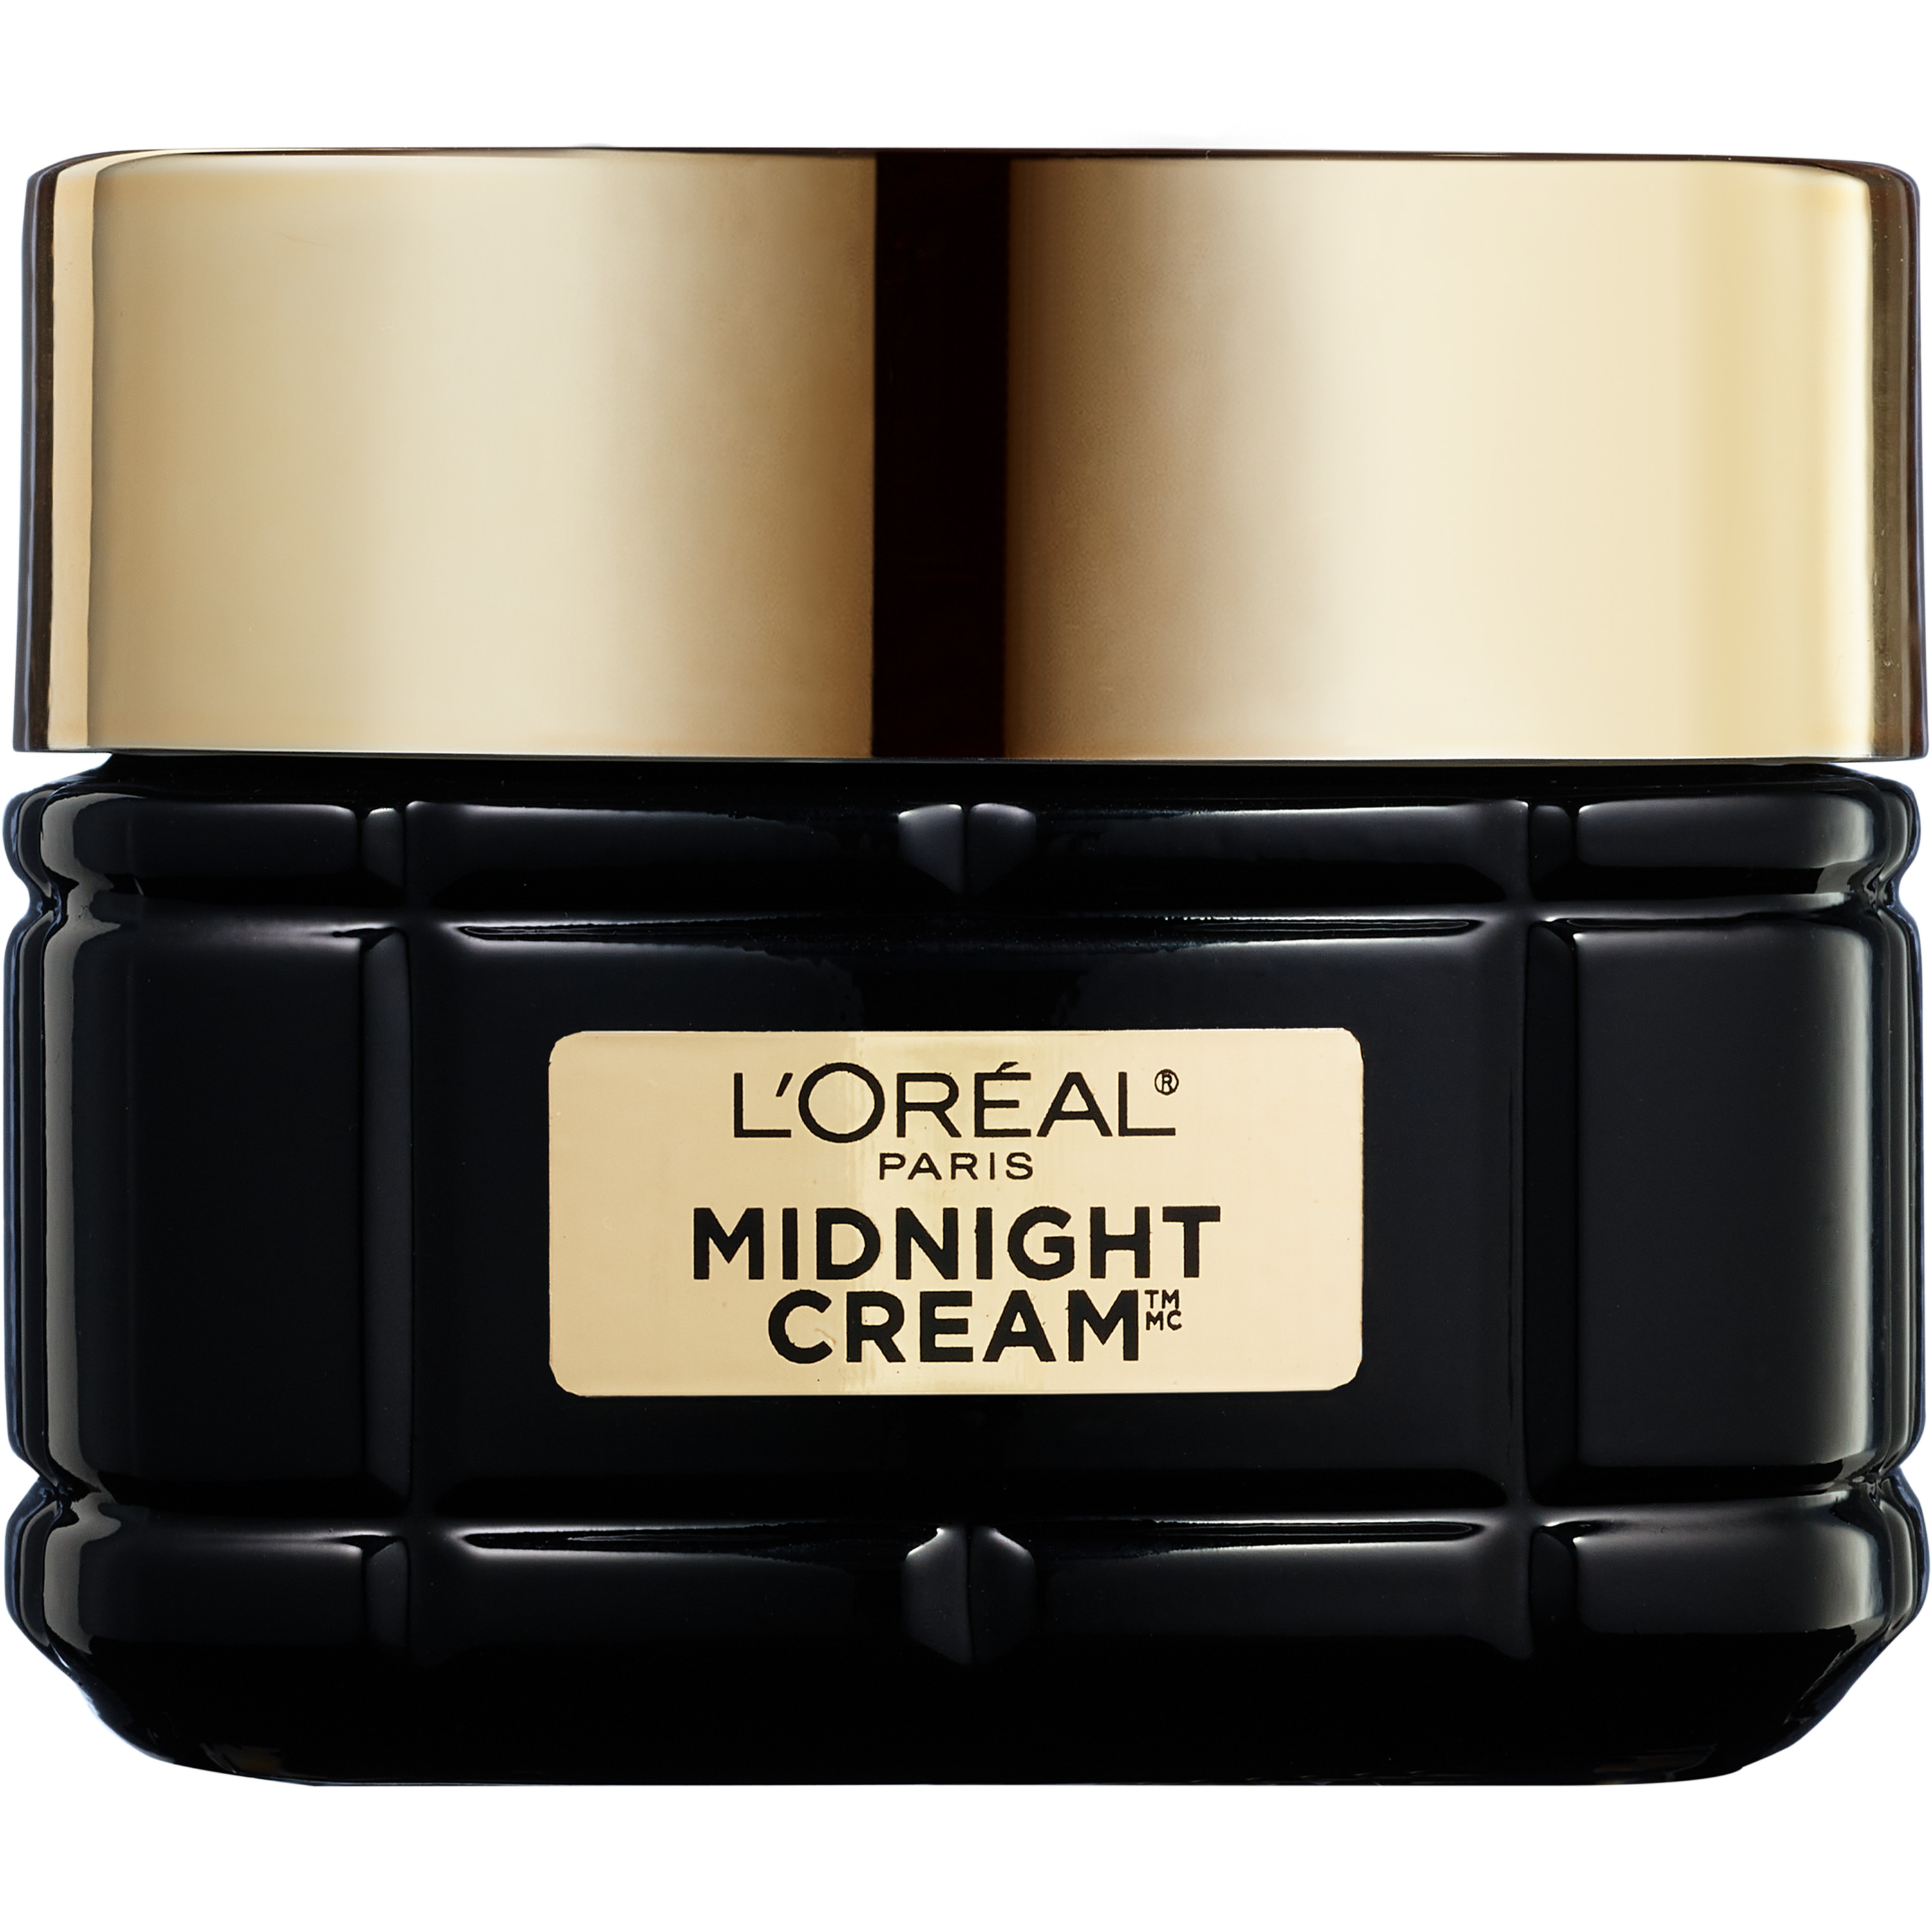 L'Oreal Paris Age Perfect Caring Cell Renewal Midnight Cream, Antioxidants, 1.7 oz - image 1 of 10